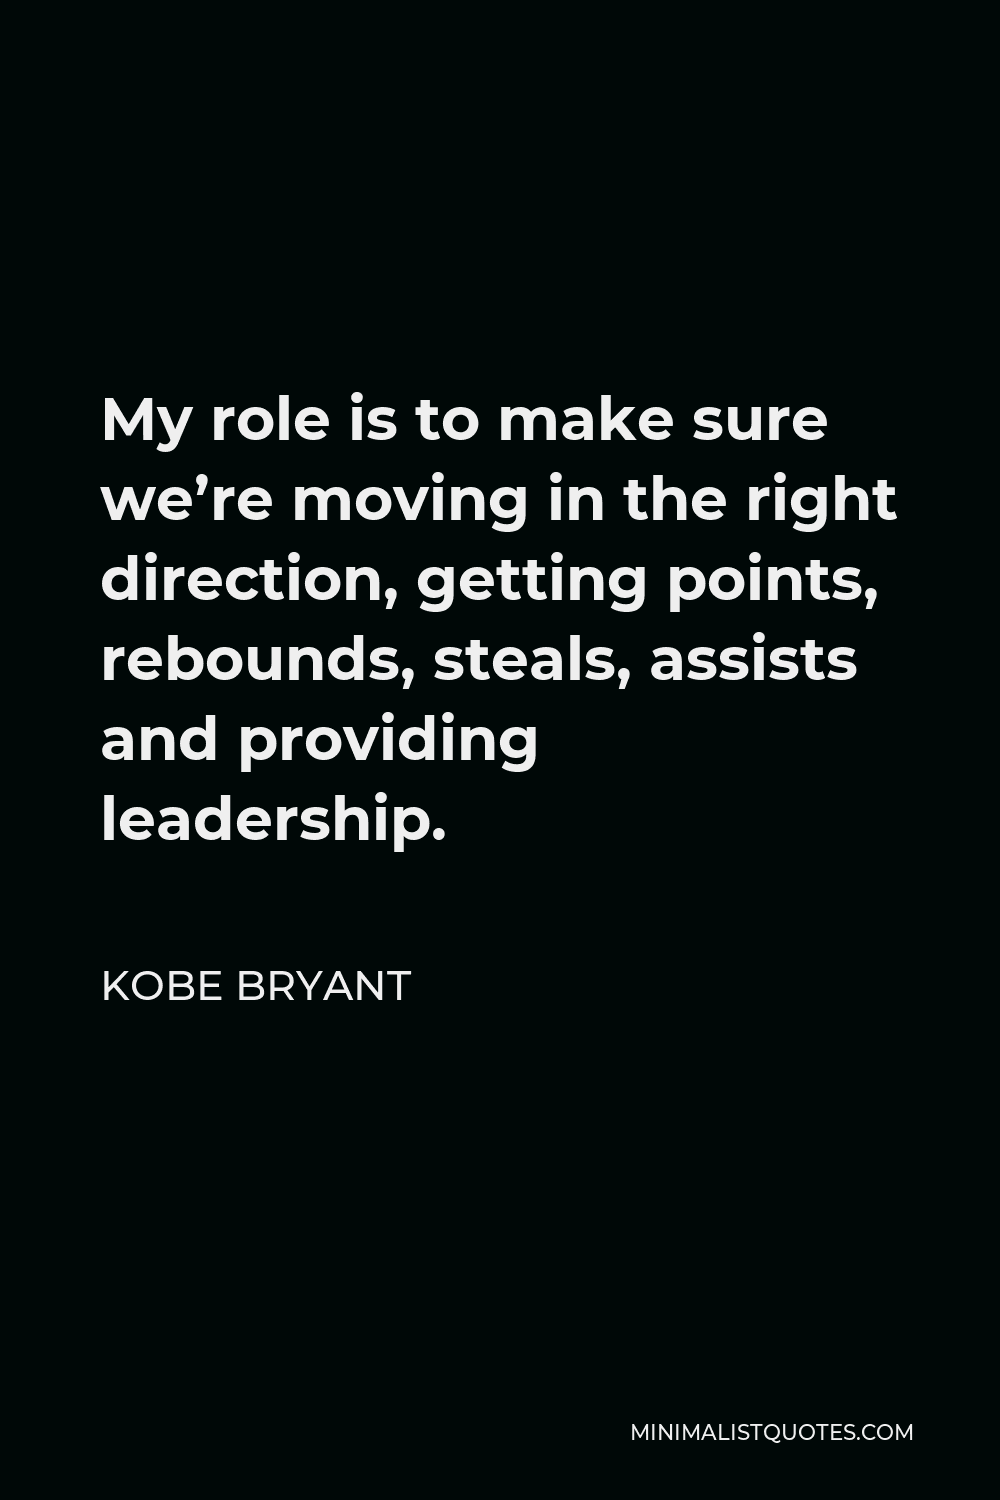 Kobe Bryant Quote - My role is to make sure we’re moving in the right direction, getting points, rebounds, steals, assists and providing leadership.